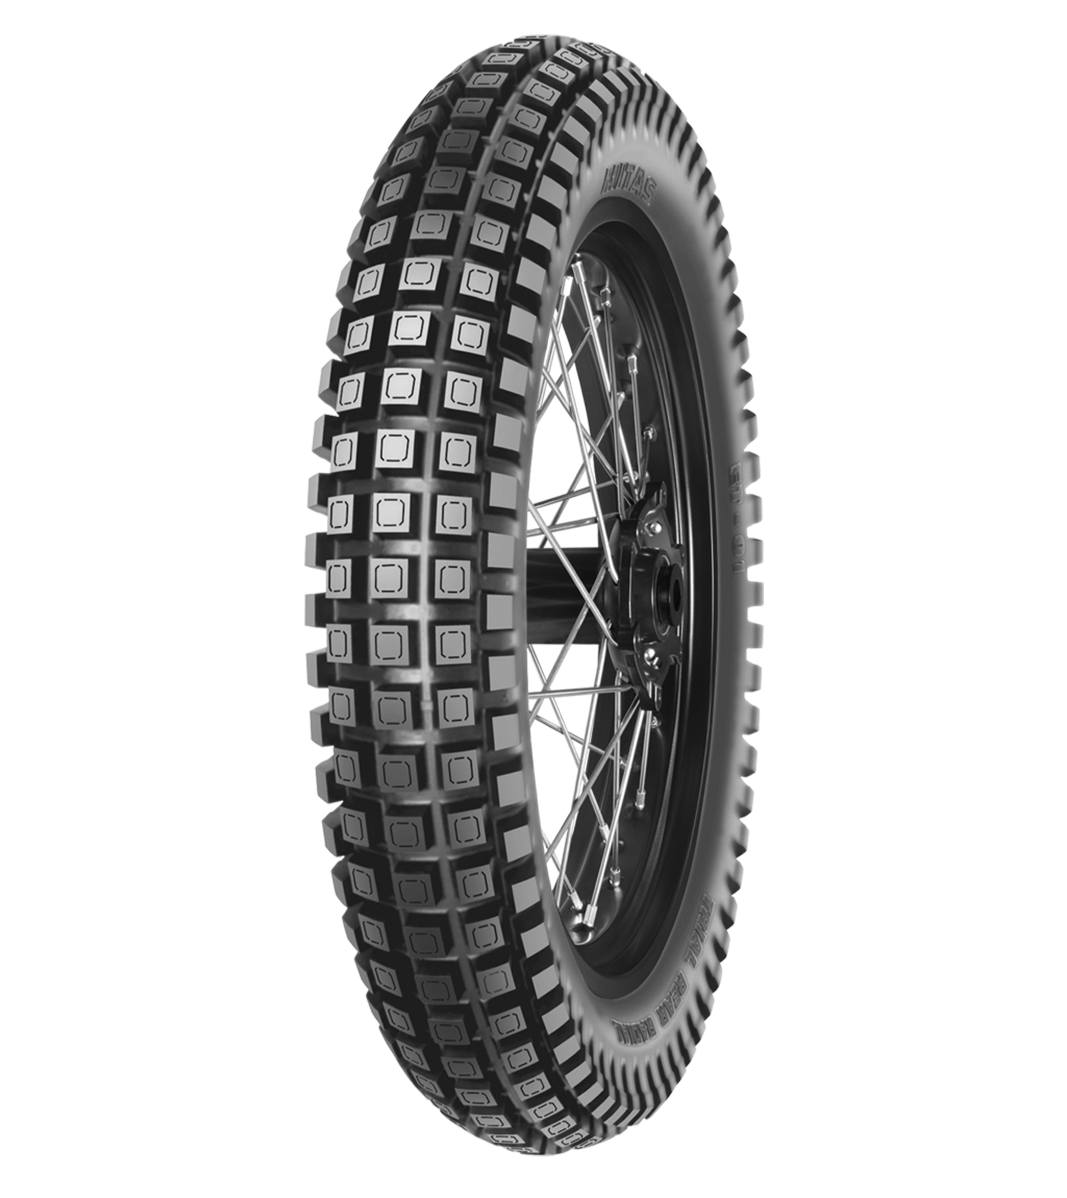 Mitas ET-01 Trial 2.75-21 Trial Off-Road 45M No Stripe Tubeless Front Tire, 224667, 2.75-21, E Series, ET-01 Trials, Front, Off-Road, Trials, Tires - Imported and distributed in North & South America by Lindeco Genuine Powersports - Premier Powersports Equipment and Accessories for Motorcycle Enthusiasts, Professional Riders and Dealers.